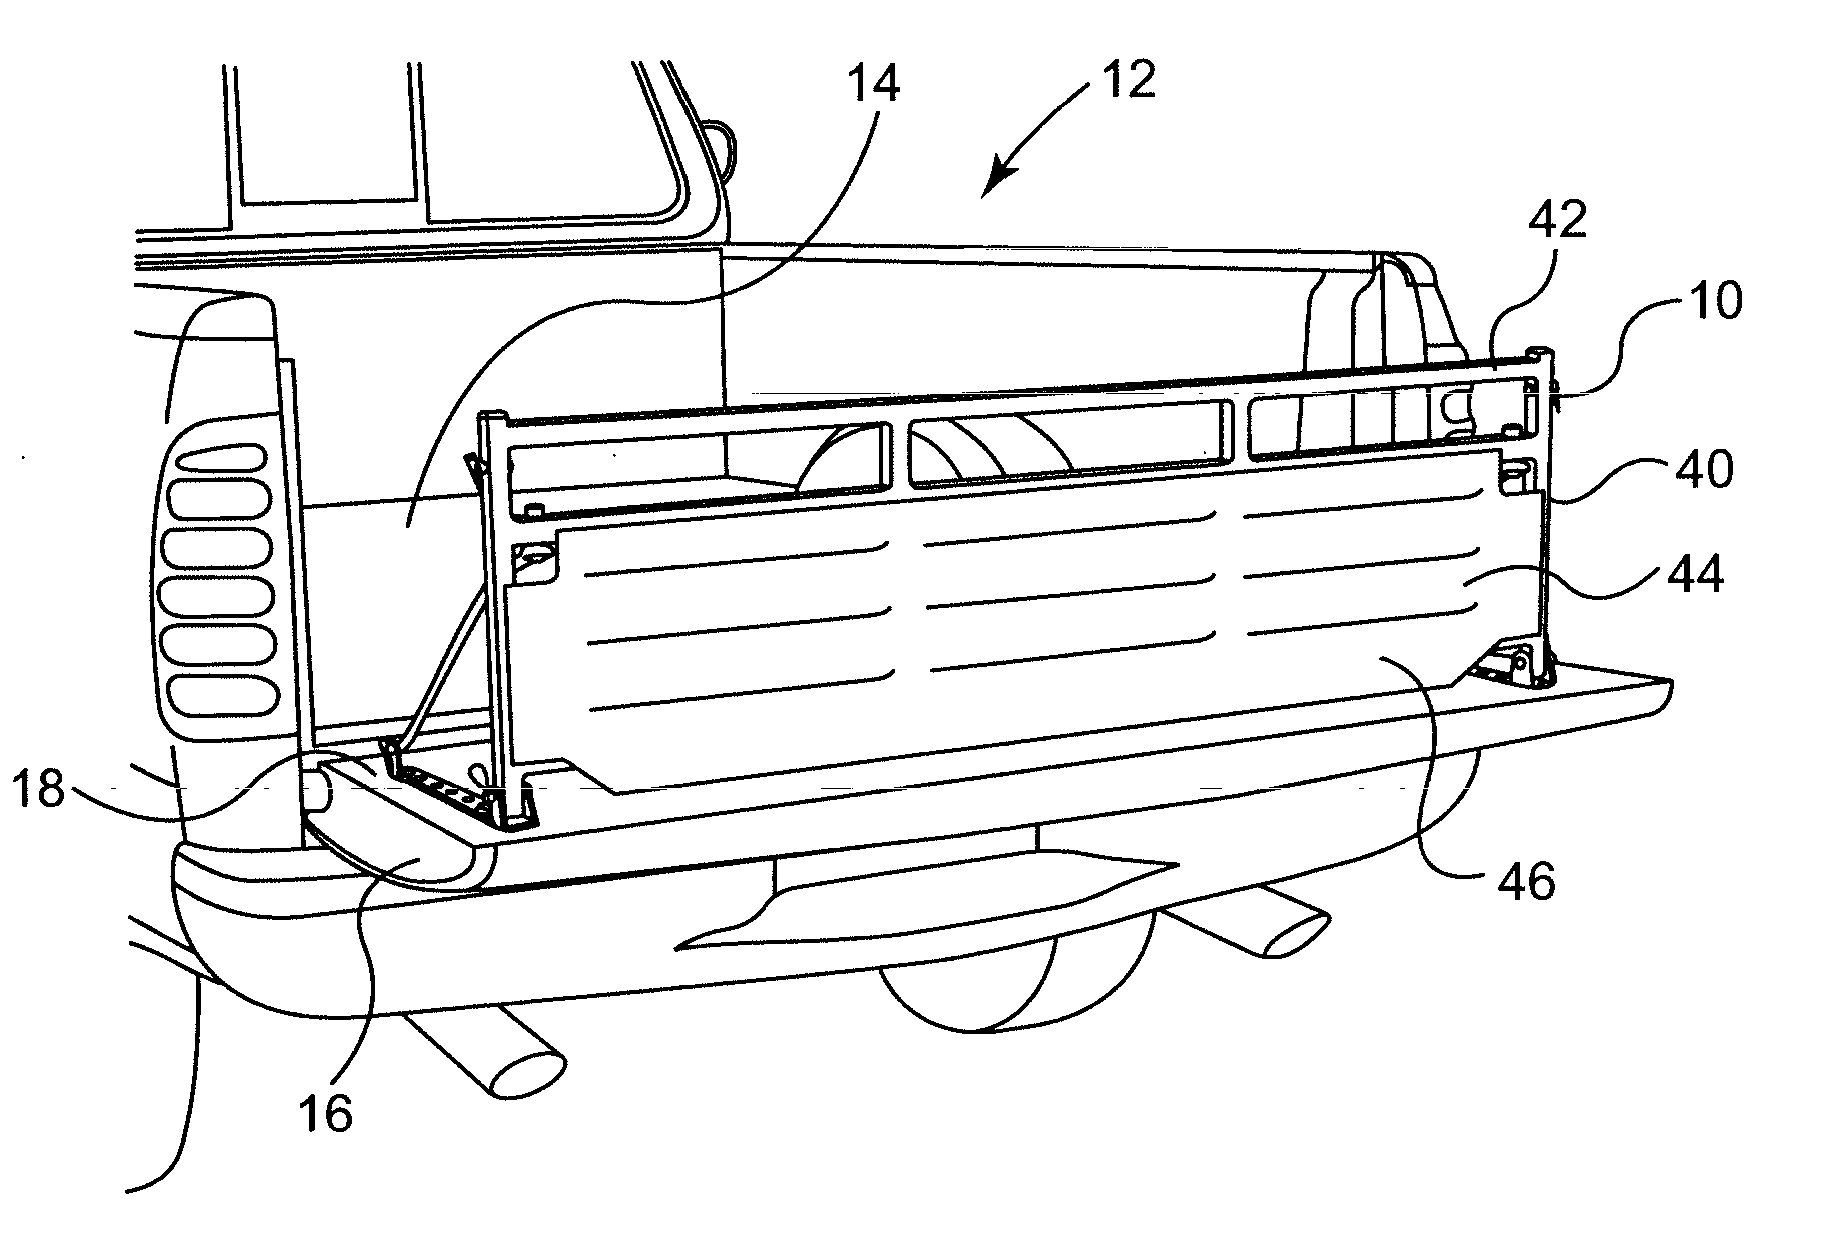 Device and Method for Extending Truck Cargo Space